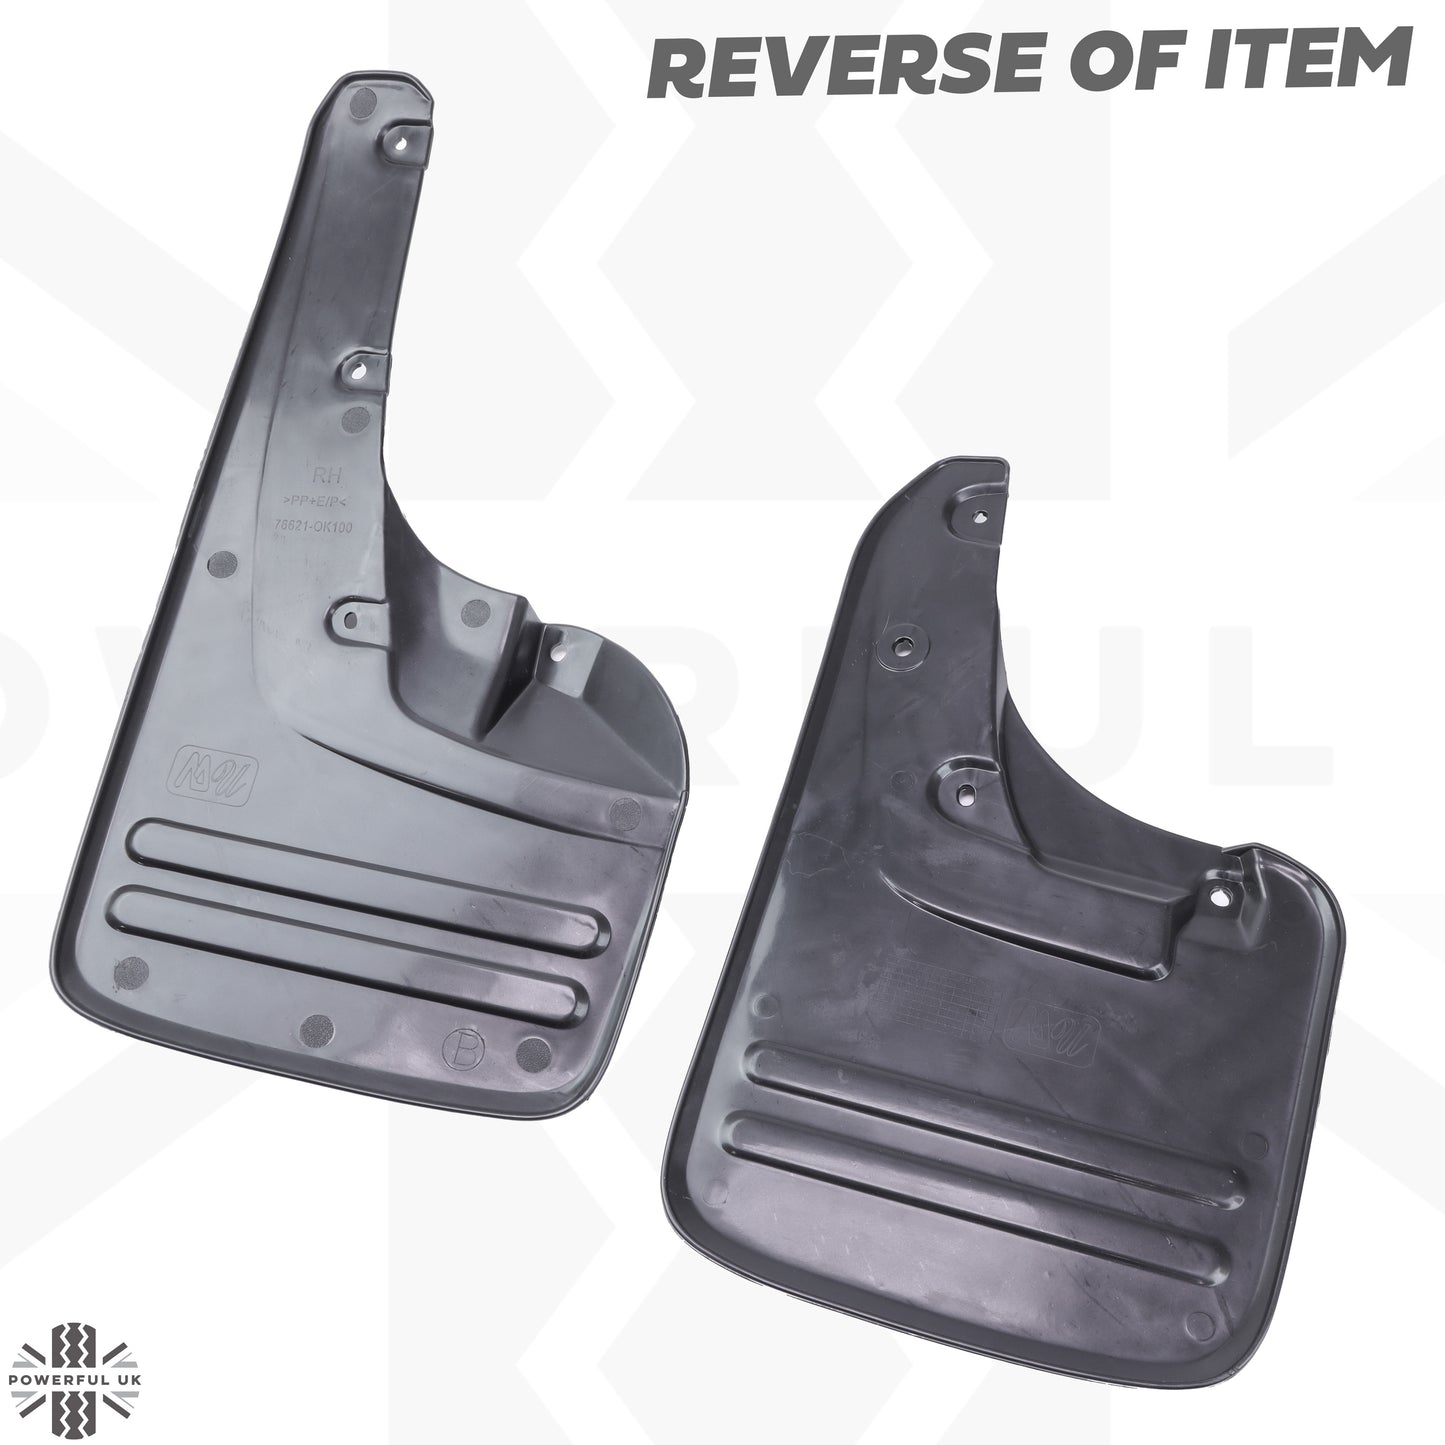 4pc Mudflap Kit - Front & Rear - for Toyota Hilux MK6